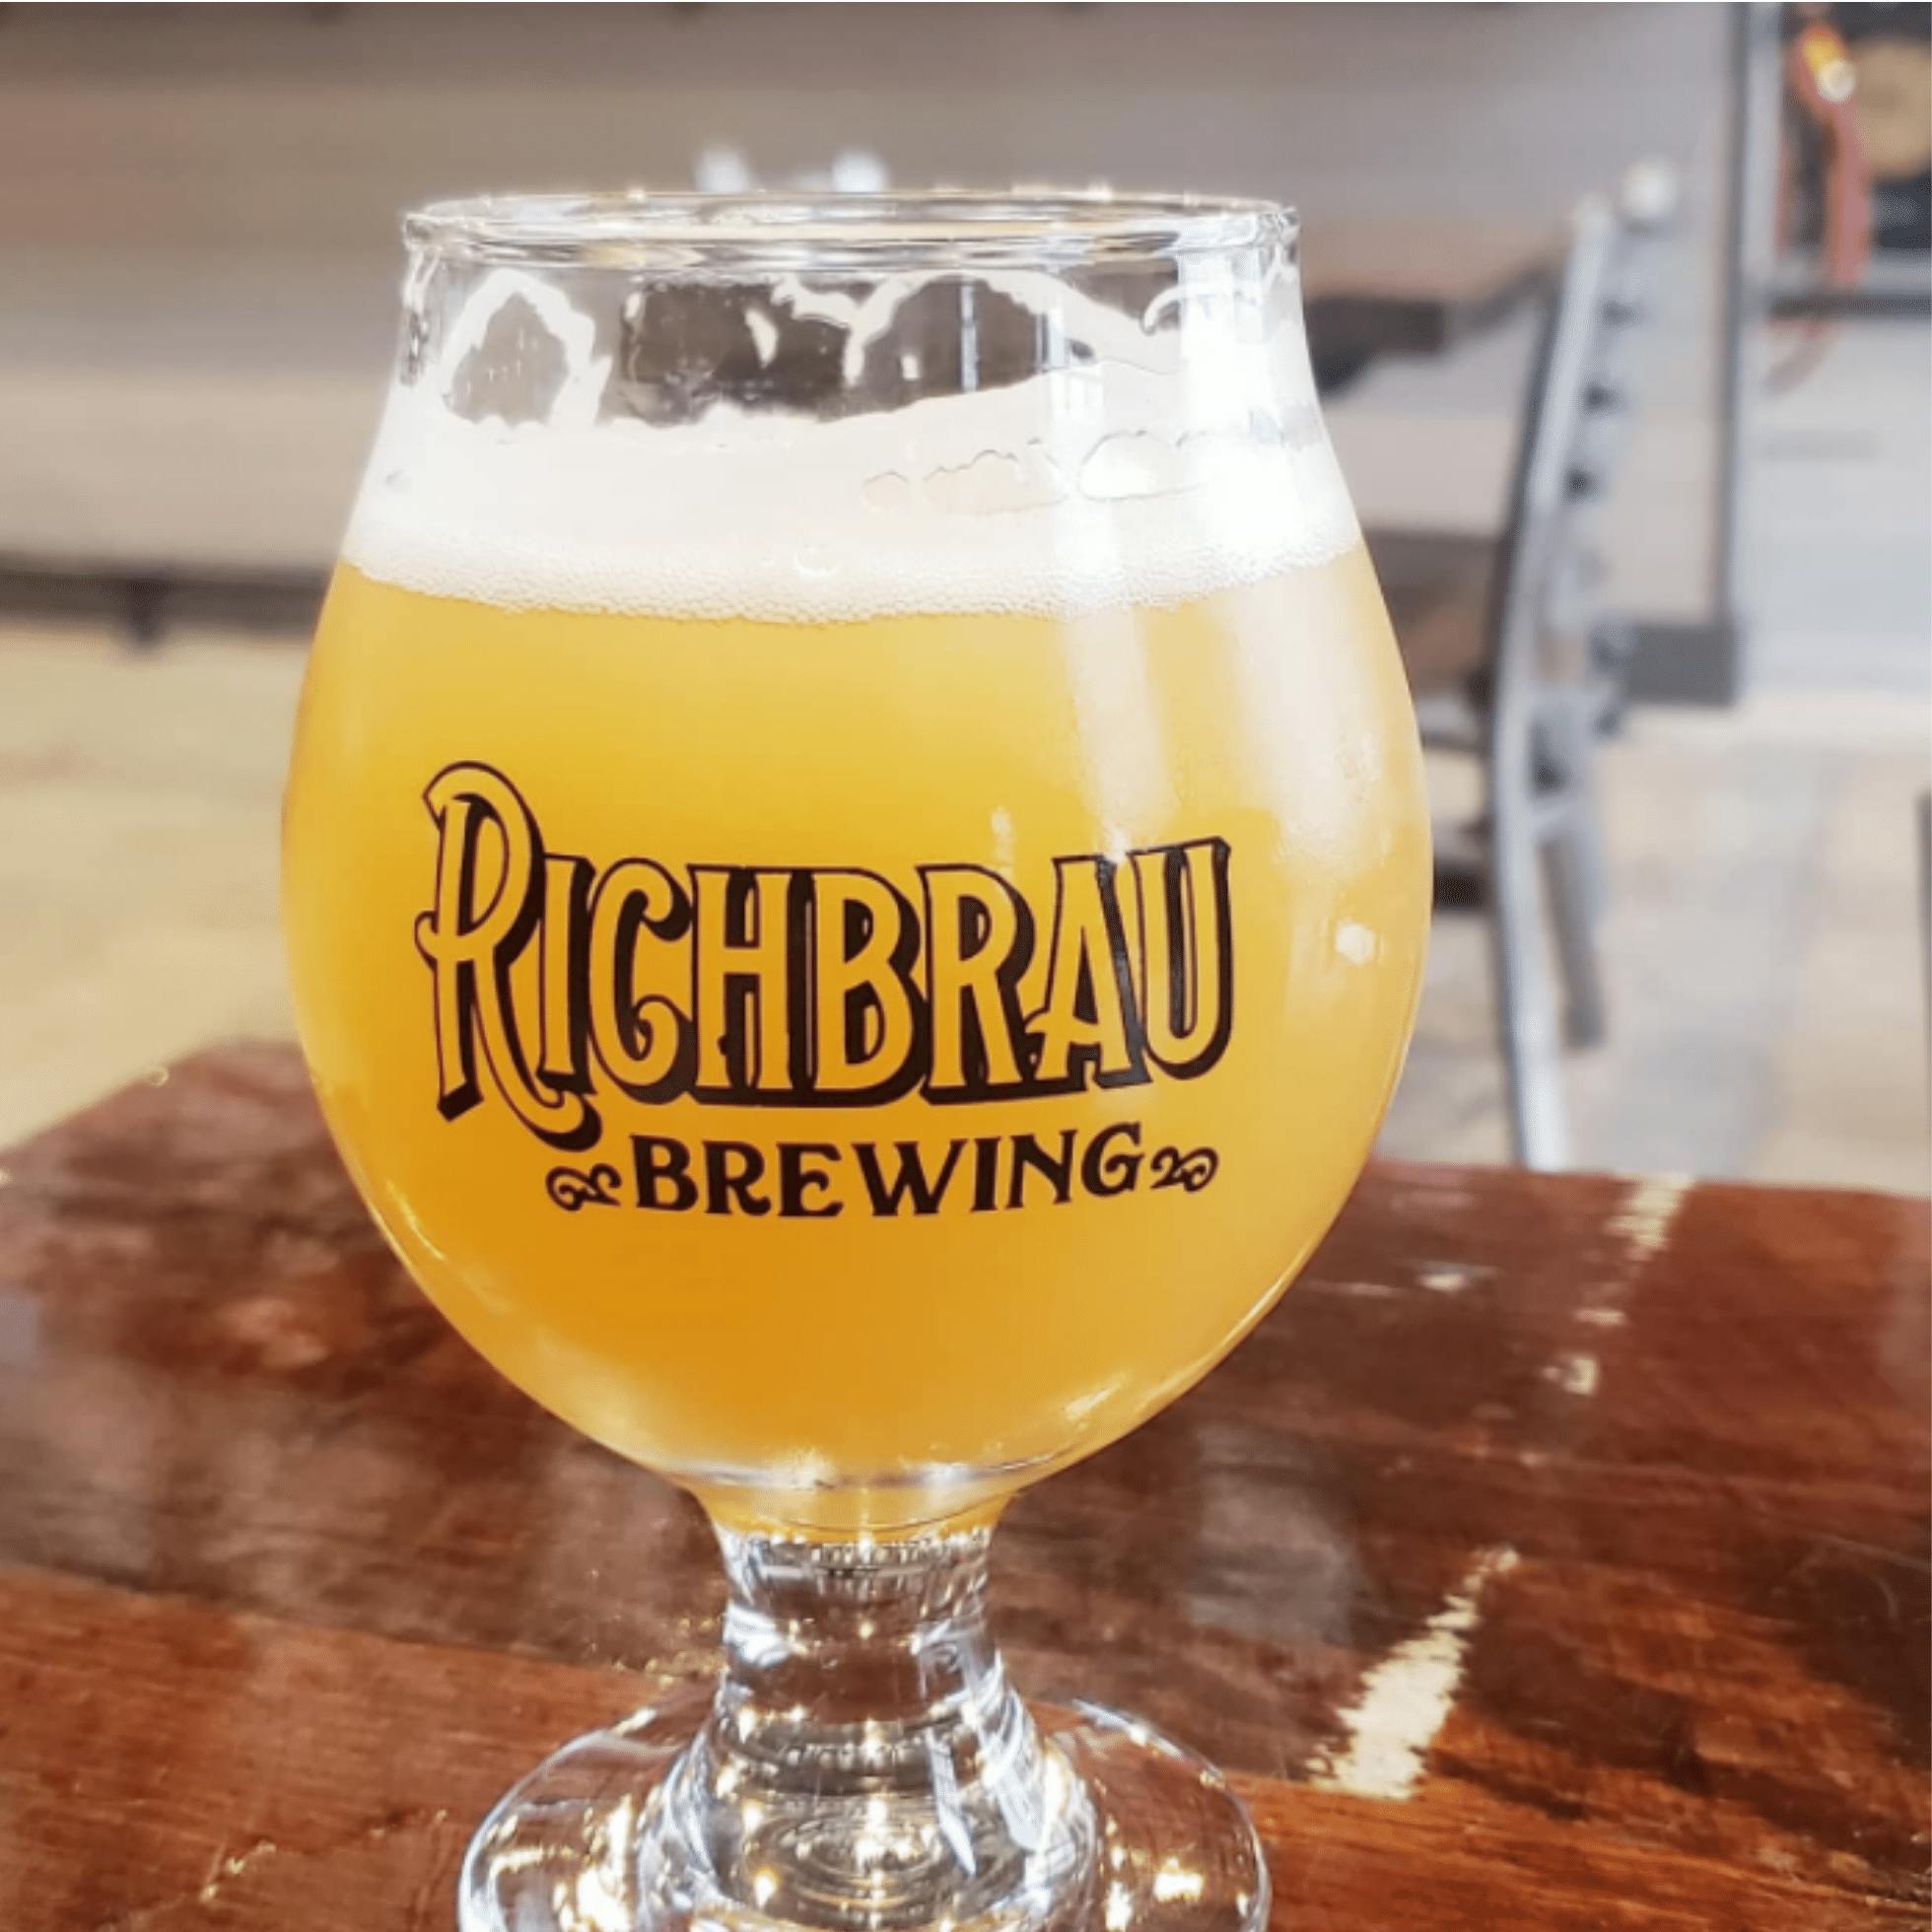 7 Breweries to Explore in Downtown Richmond